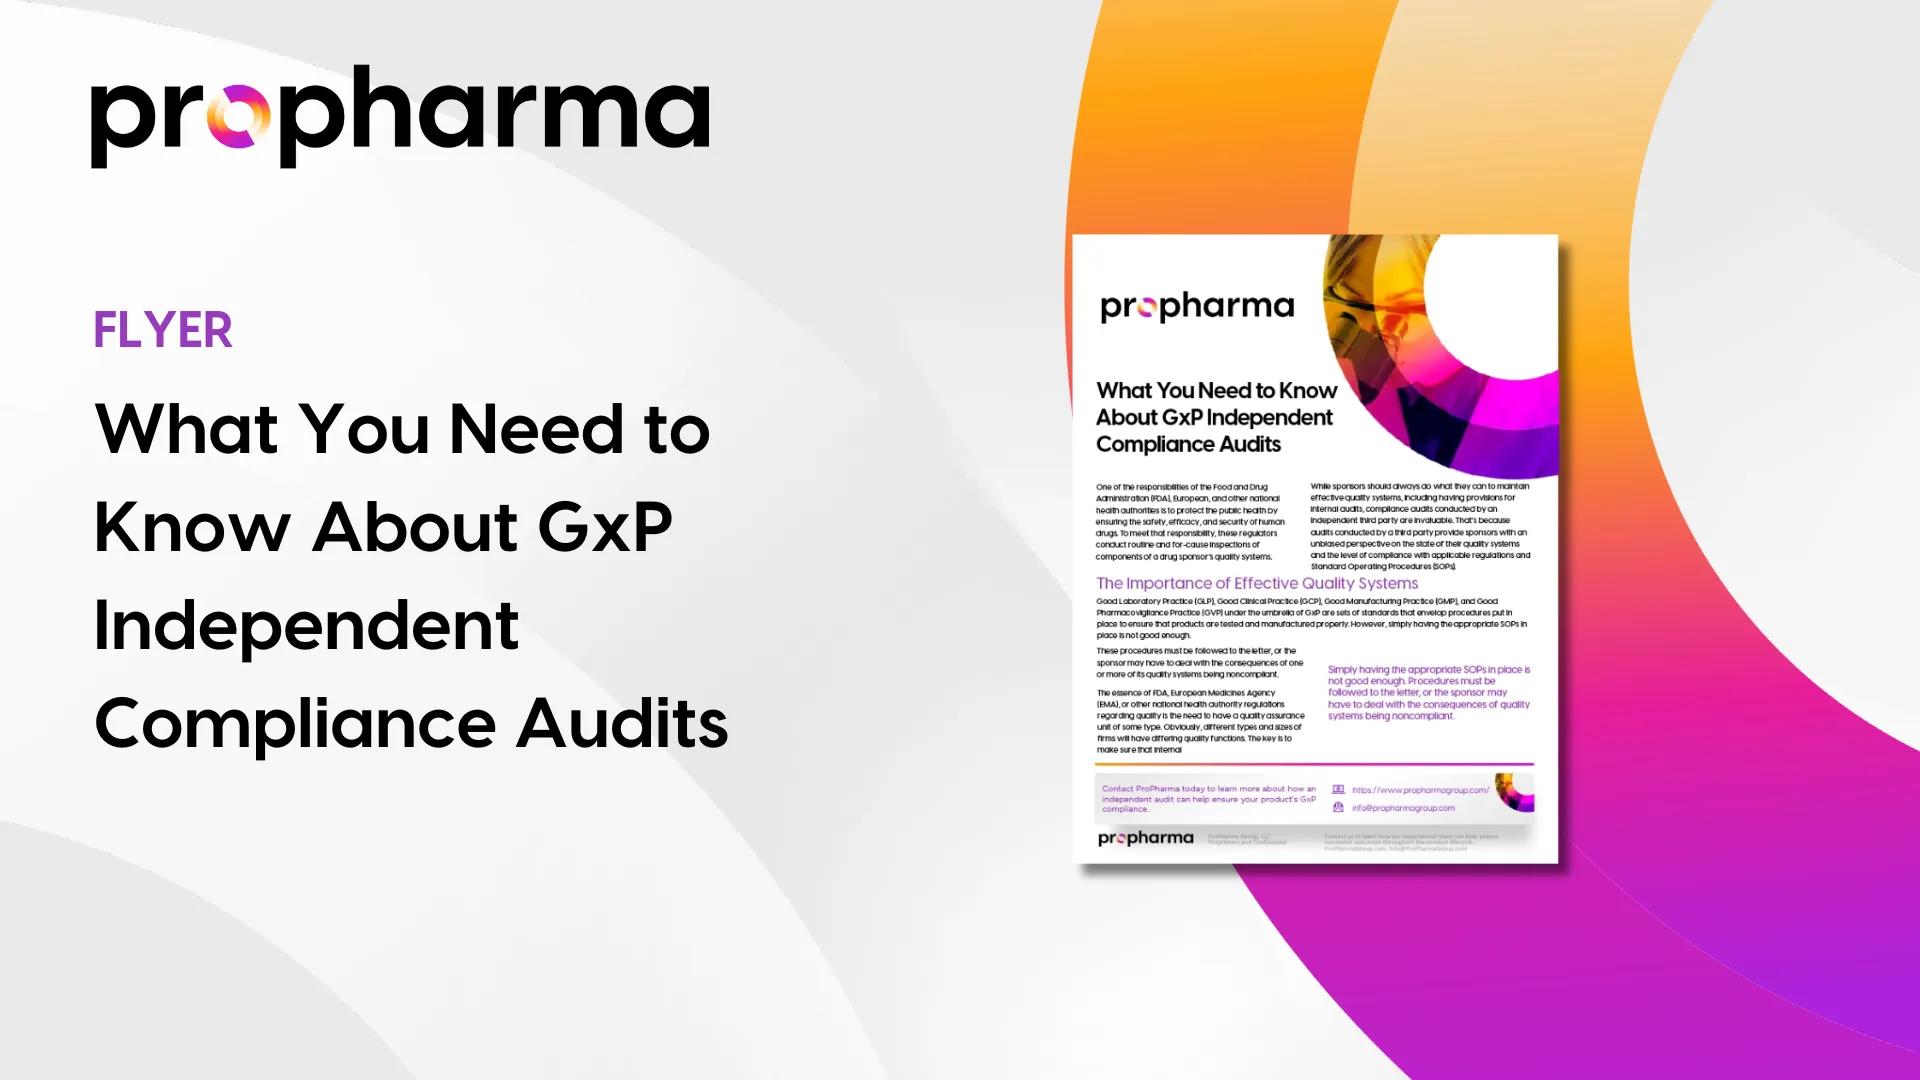 Whitepaper: What You Need to Know About GxP Independent Compliance Audits